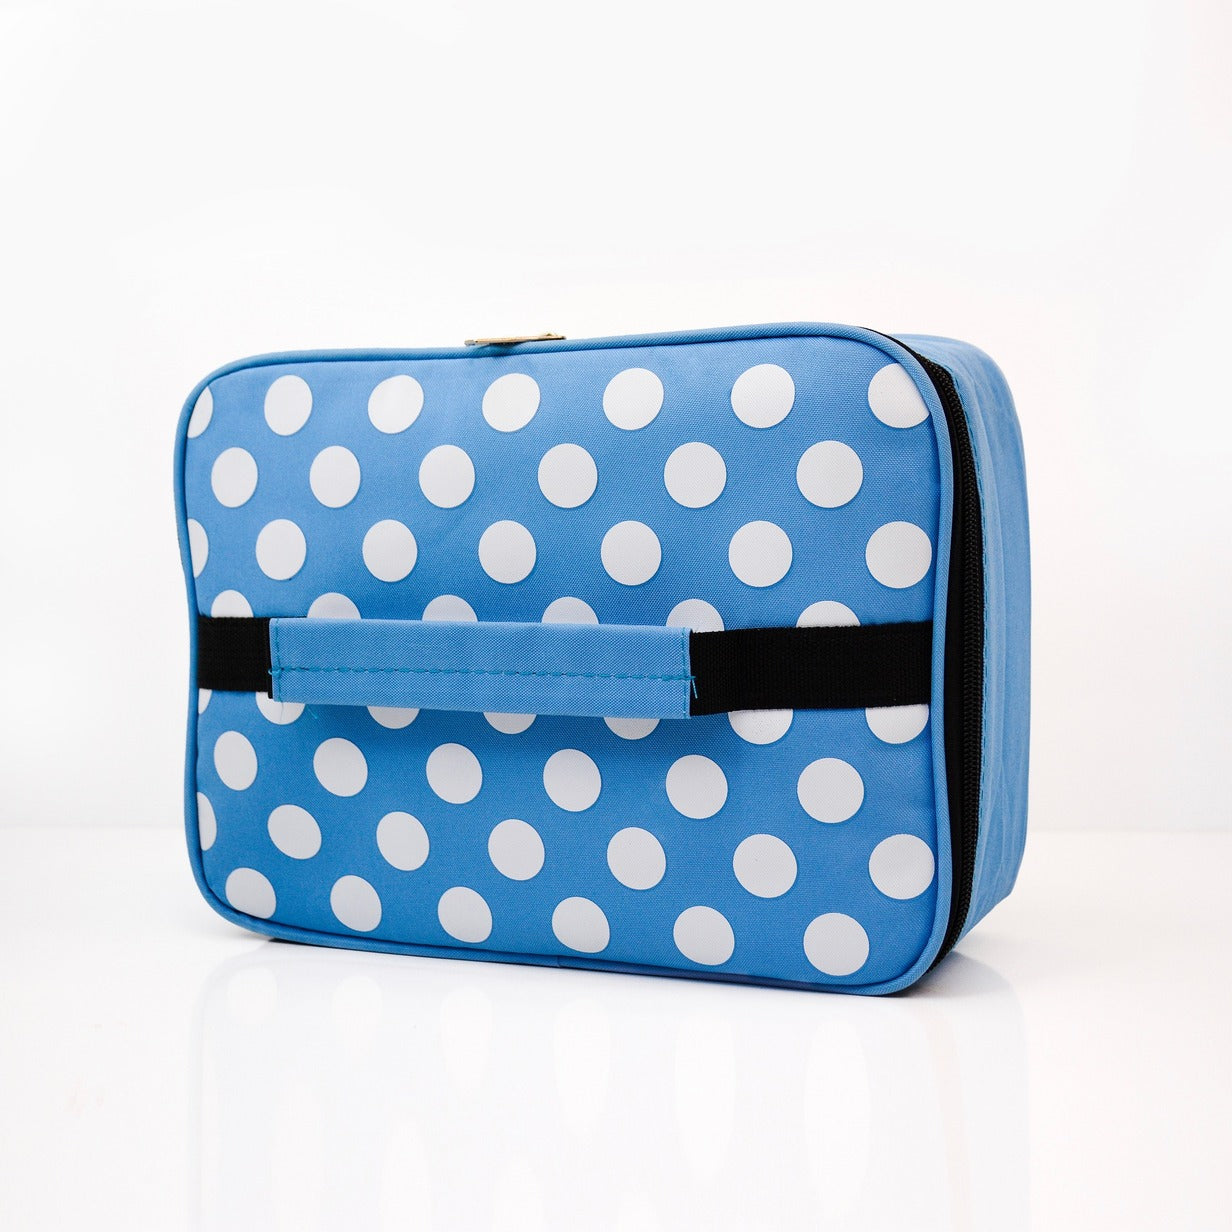  Polka Dotted Insulated Square Lunch Bag Zaappy.com